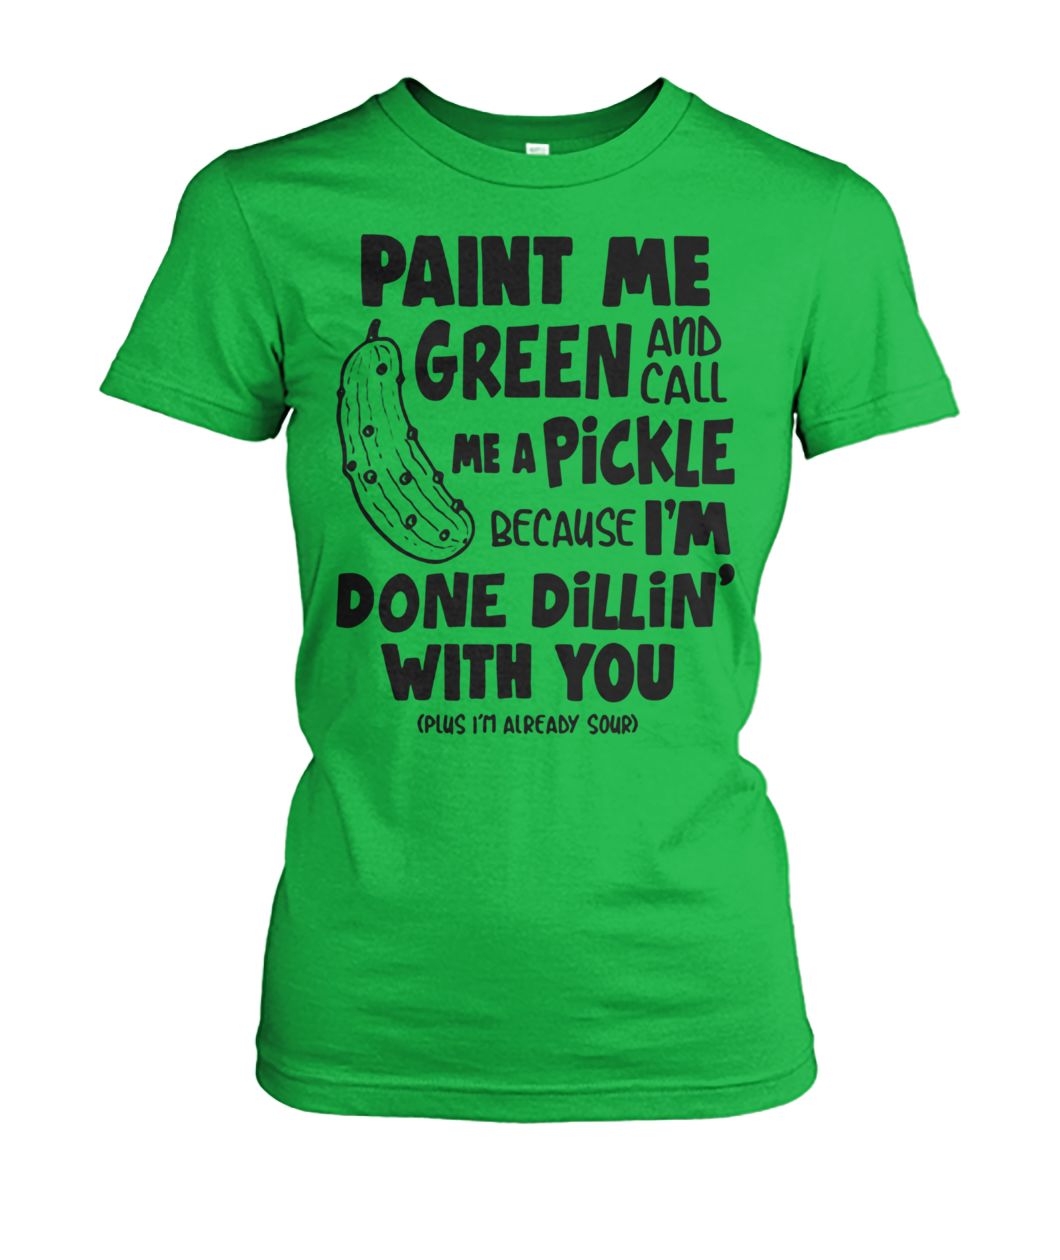 Paint me green and call me a pickle women's crew tee